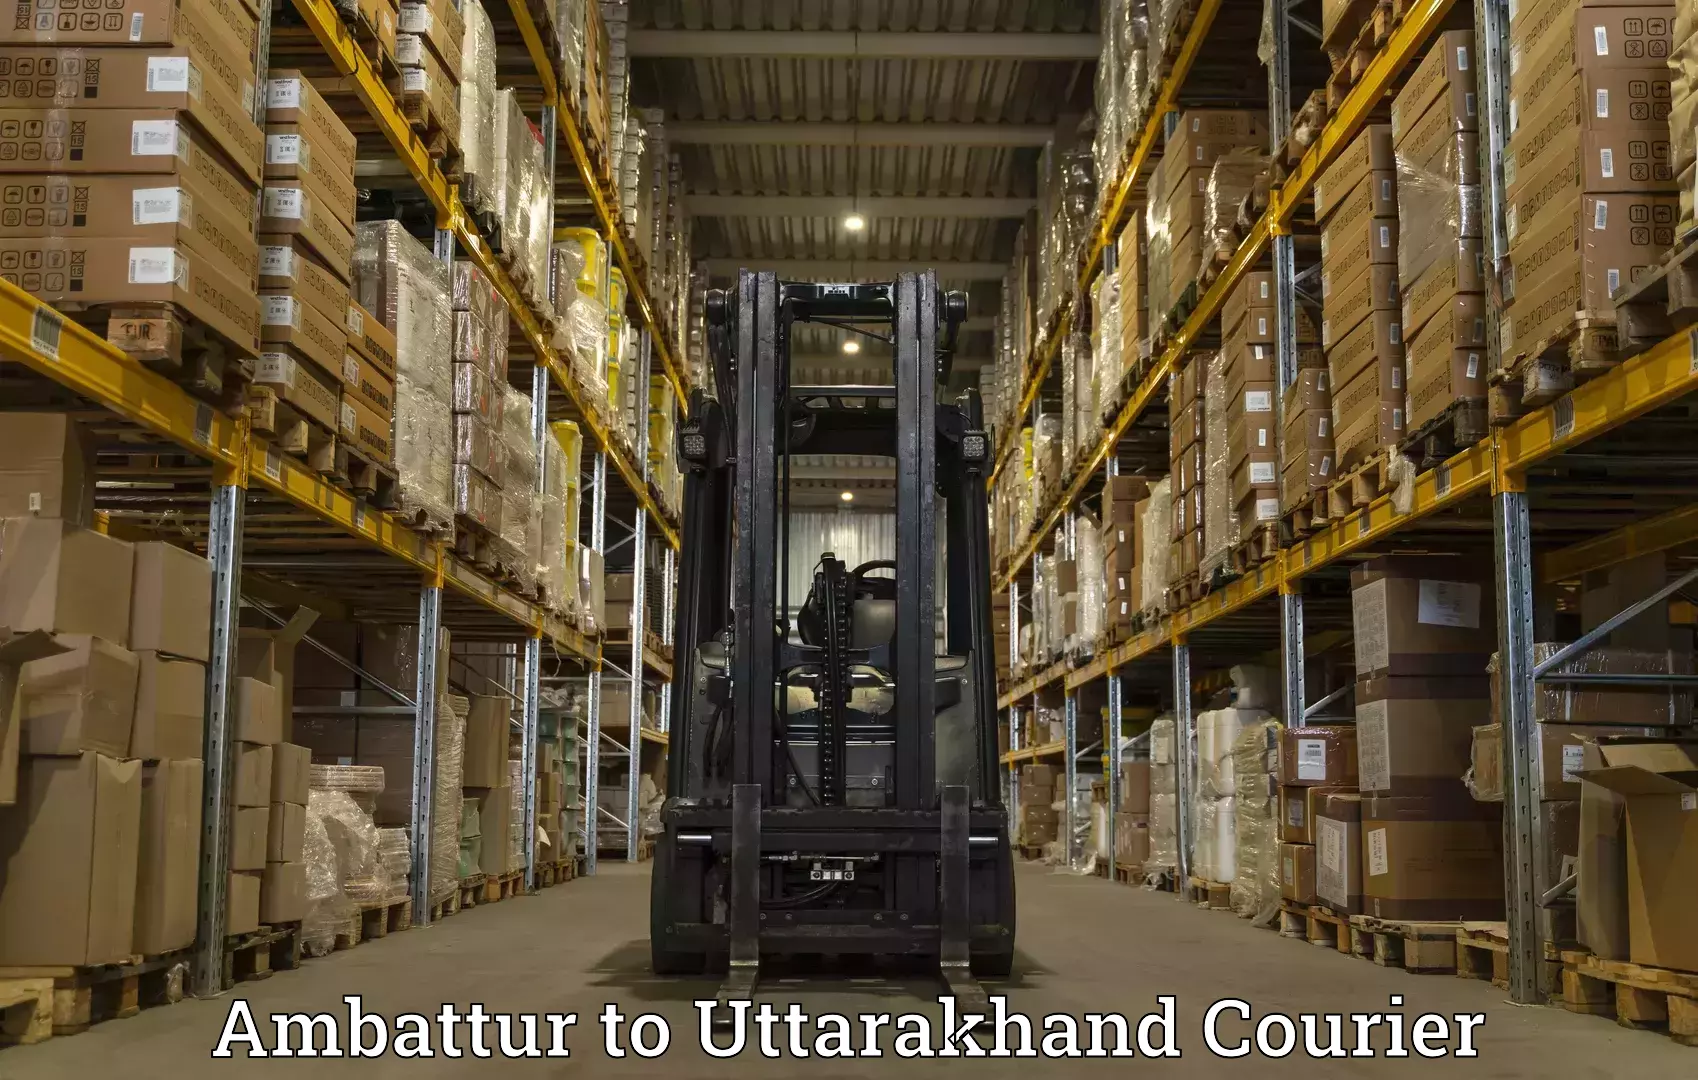 Express delivery capabilities in Ambattur to Uttarakhand